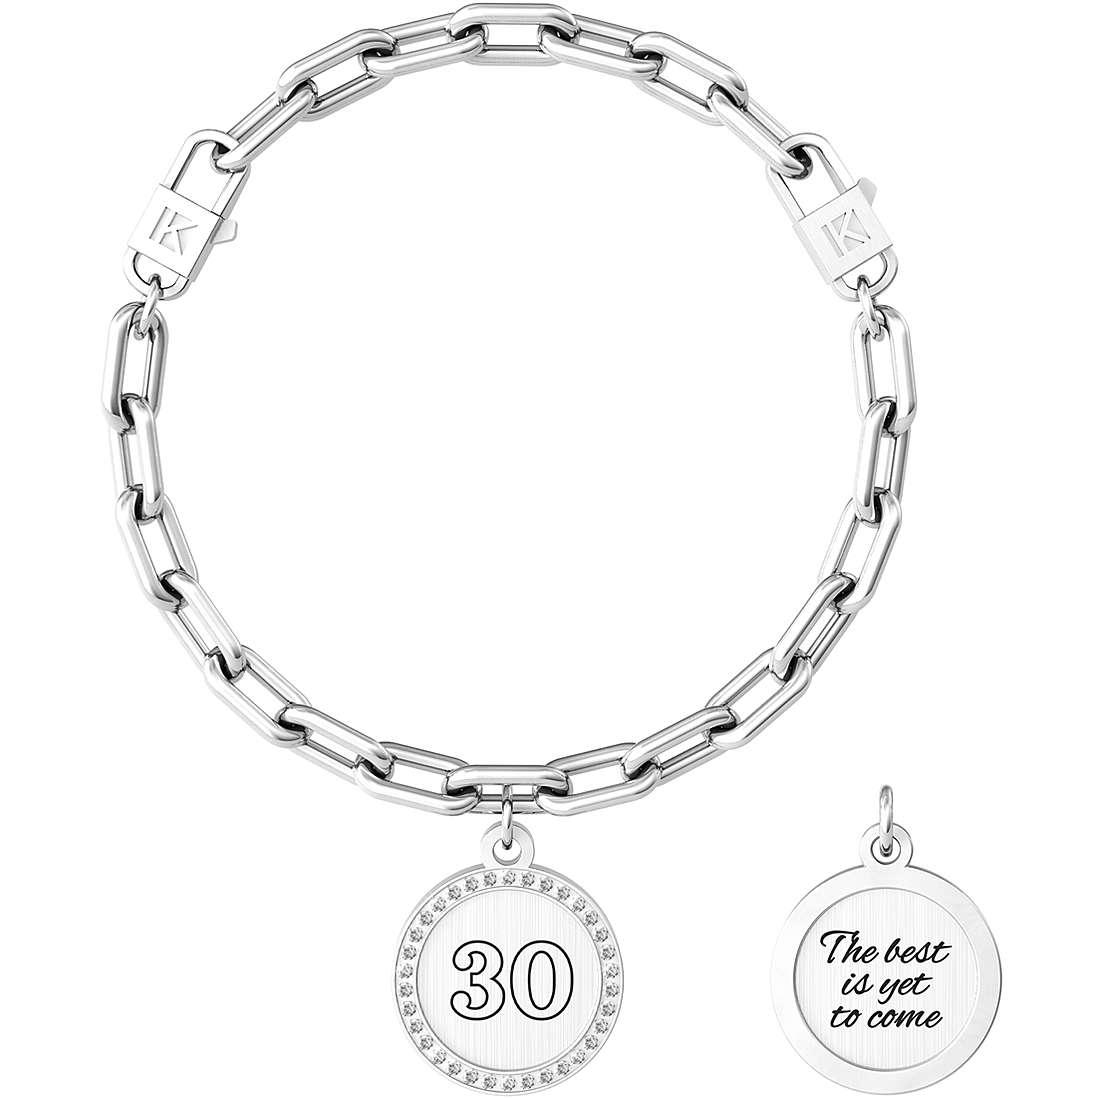 Kidut Women's Bracelet Special Moments collection - 30 | THE BEST IS YET TO COME - 731951